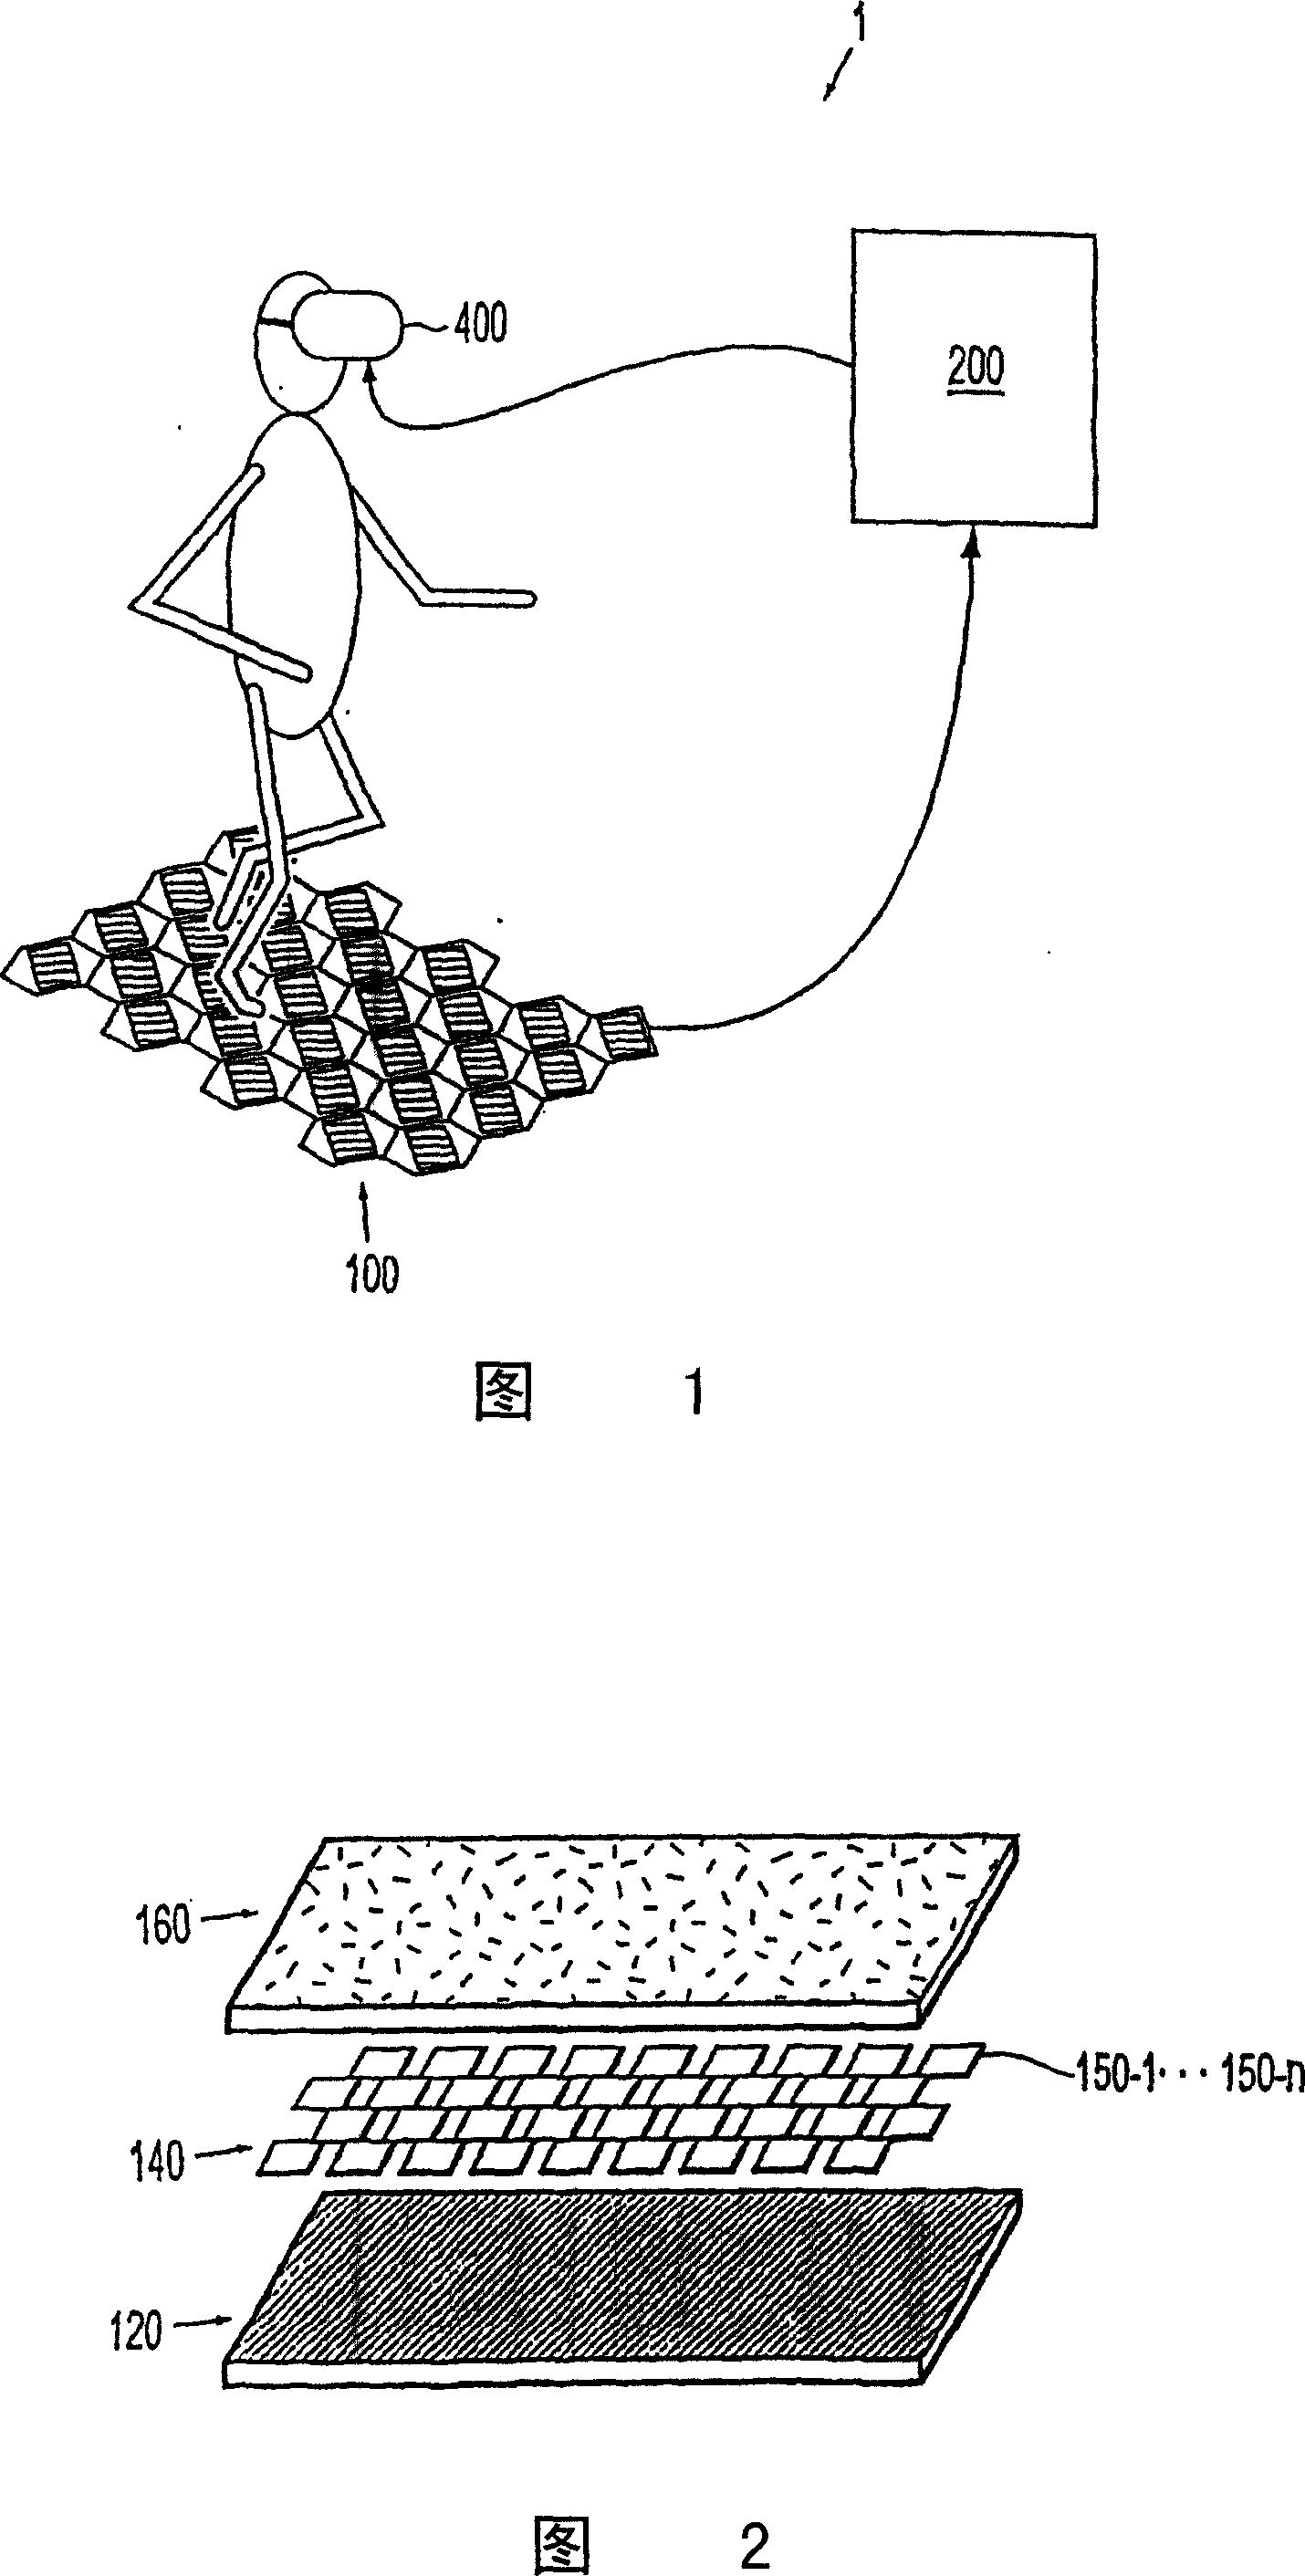 Virtual reality system, and mobile interface and method for providing mobile signals to the same